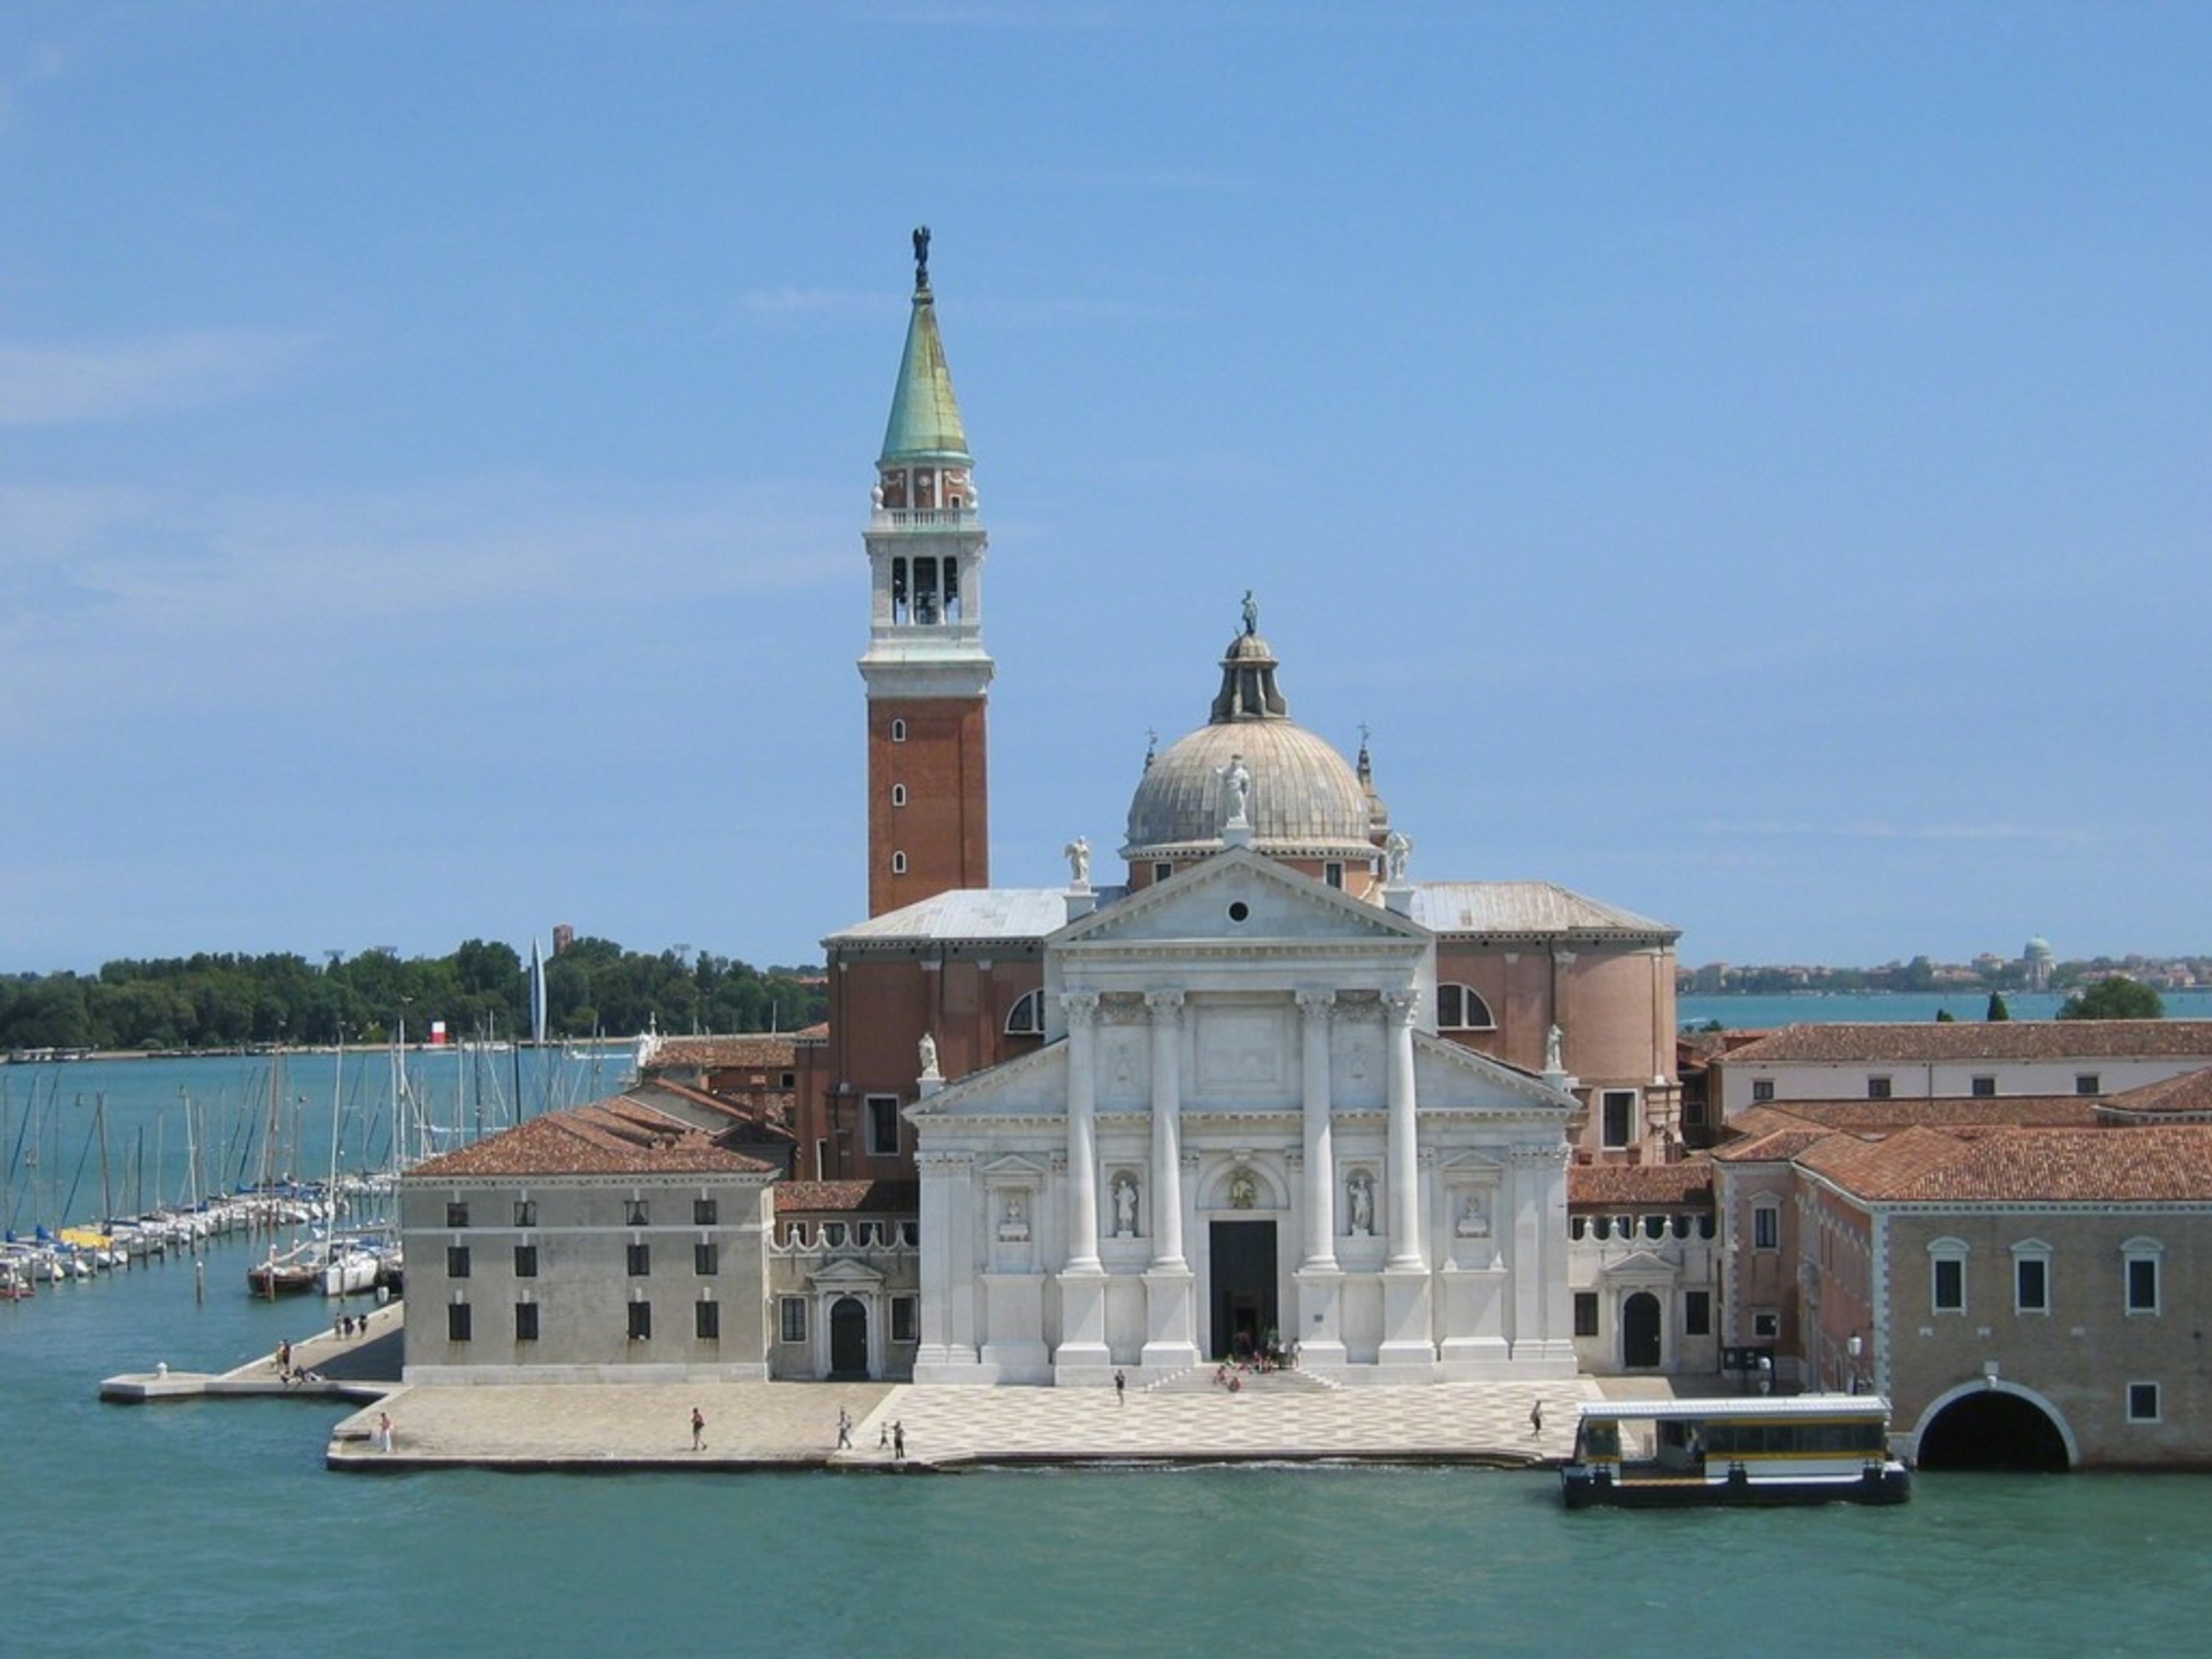 <p>Everyone needs a picture of themselves in Venice. Whether it's for Instagram, Twitter, or Tinder, you can't go wrong with the tower of San Giorgio, which boasts panoramic views of Venice from 350-feet up. </p><p><a href='https://www.msn.com/en-us/community/channel/vid-cj9pqbr0vn9in2b6ddcd8sfgpfq6x6utp44fssrv6mc2gtybw0us'>Follow us on MSN to see more of our exclusive lifestyle content.</a></p>